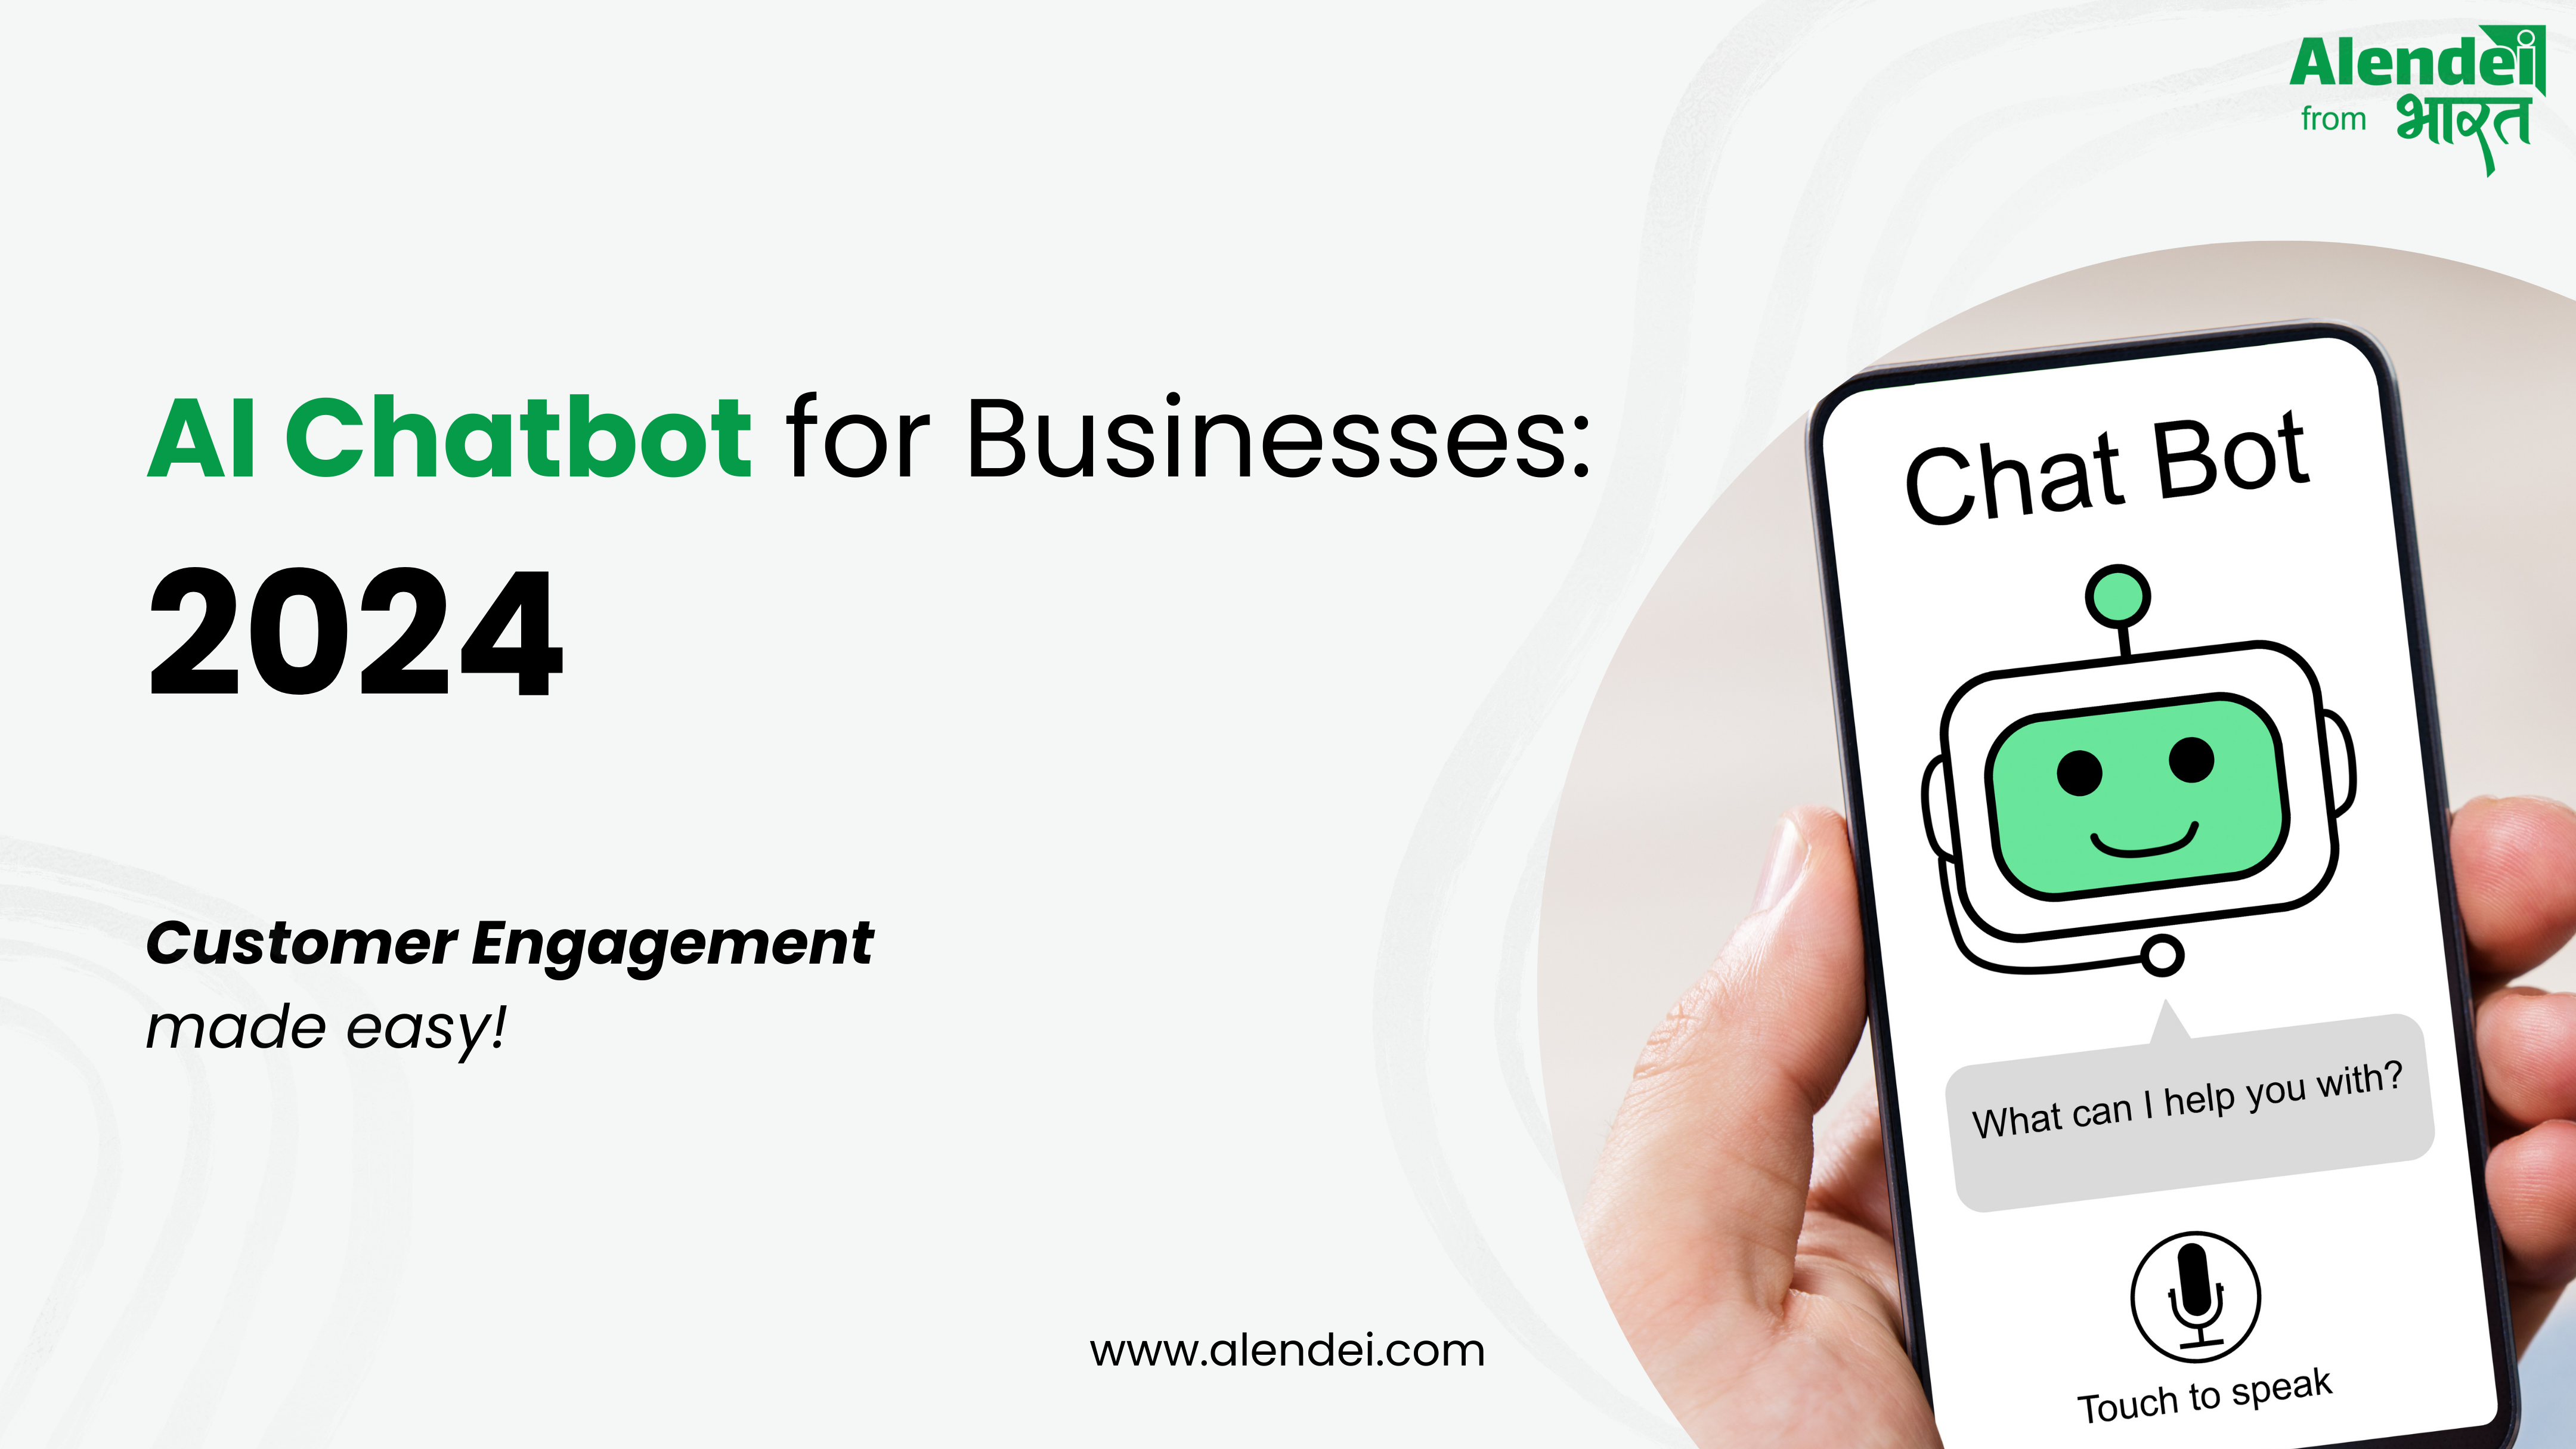 AI chatbots for businesses providing customer support